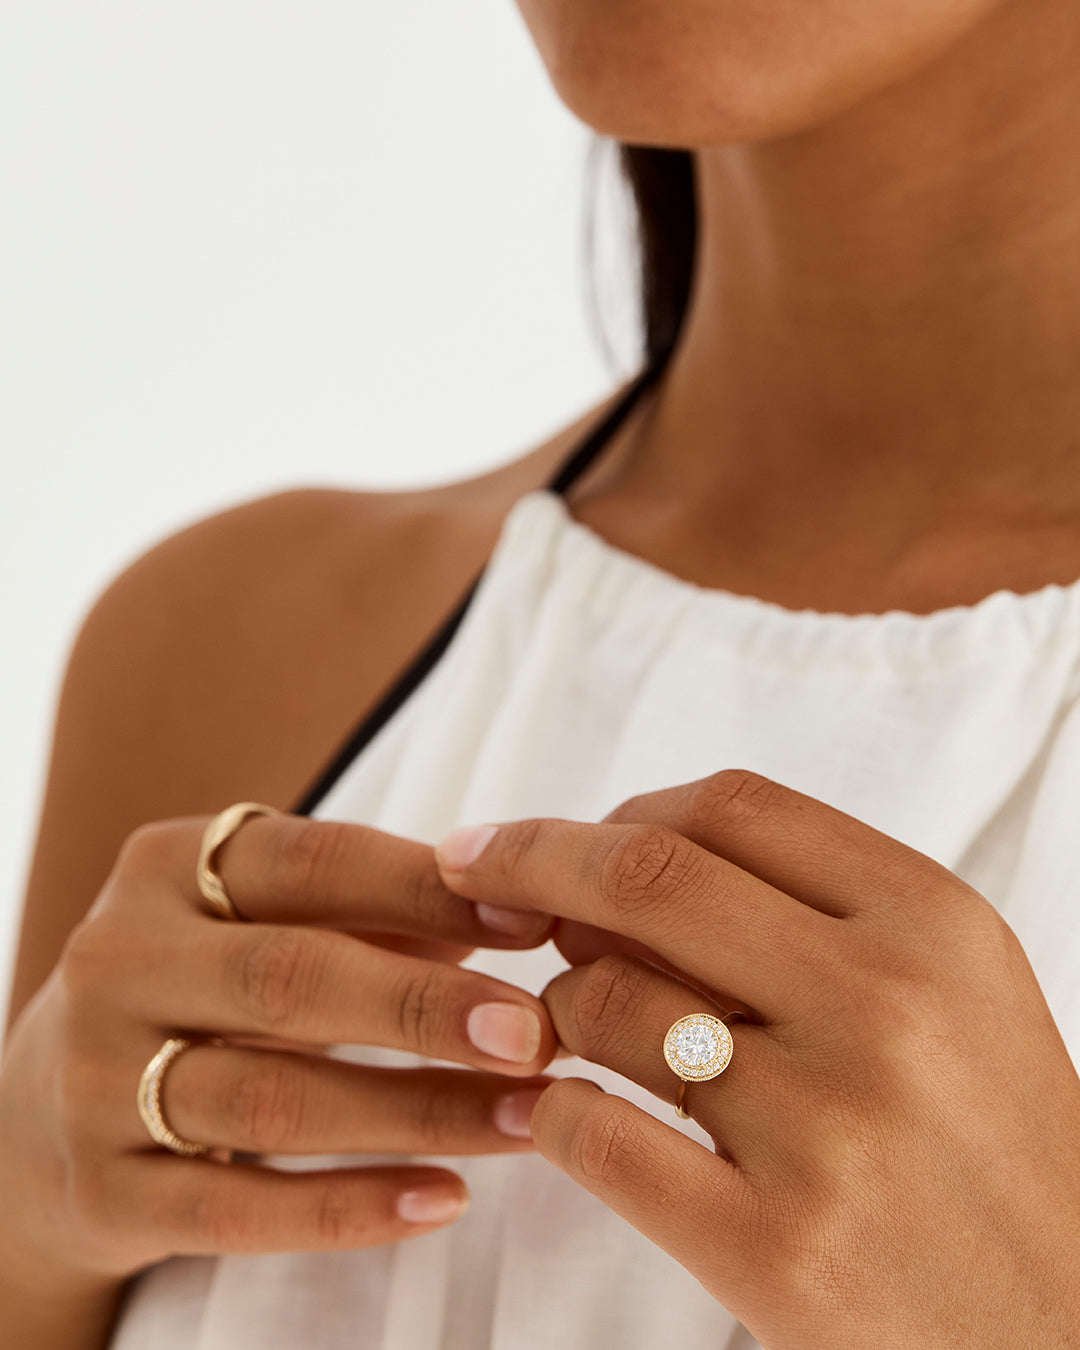 A model wears a classic white diamond halo engagement ring